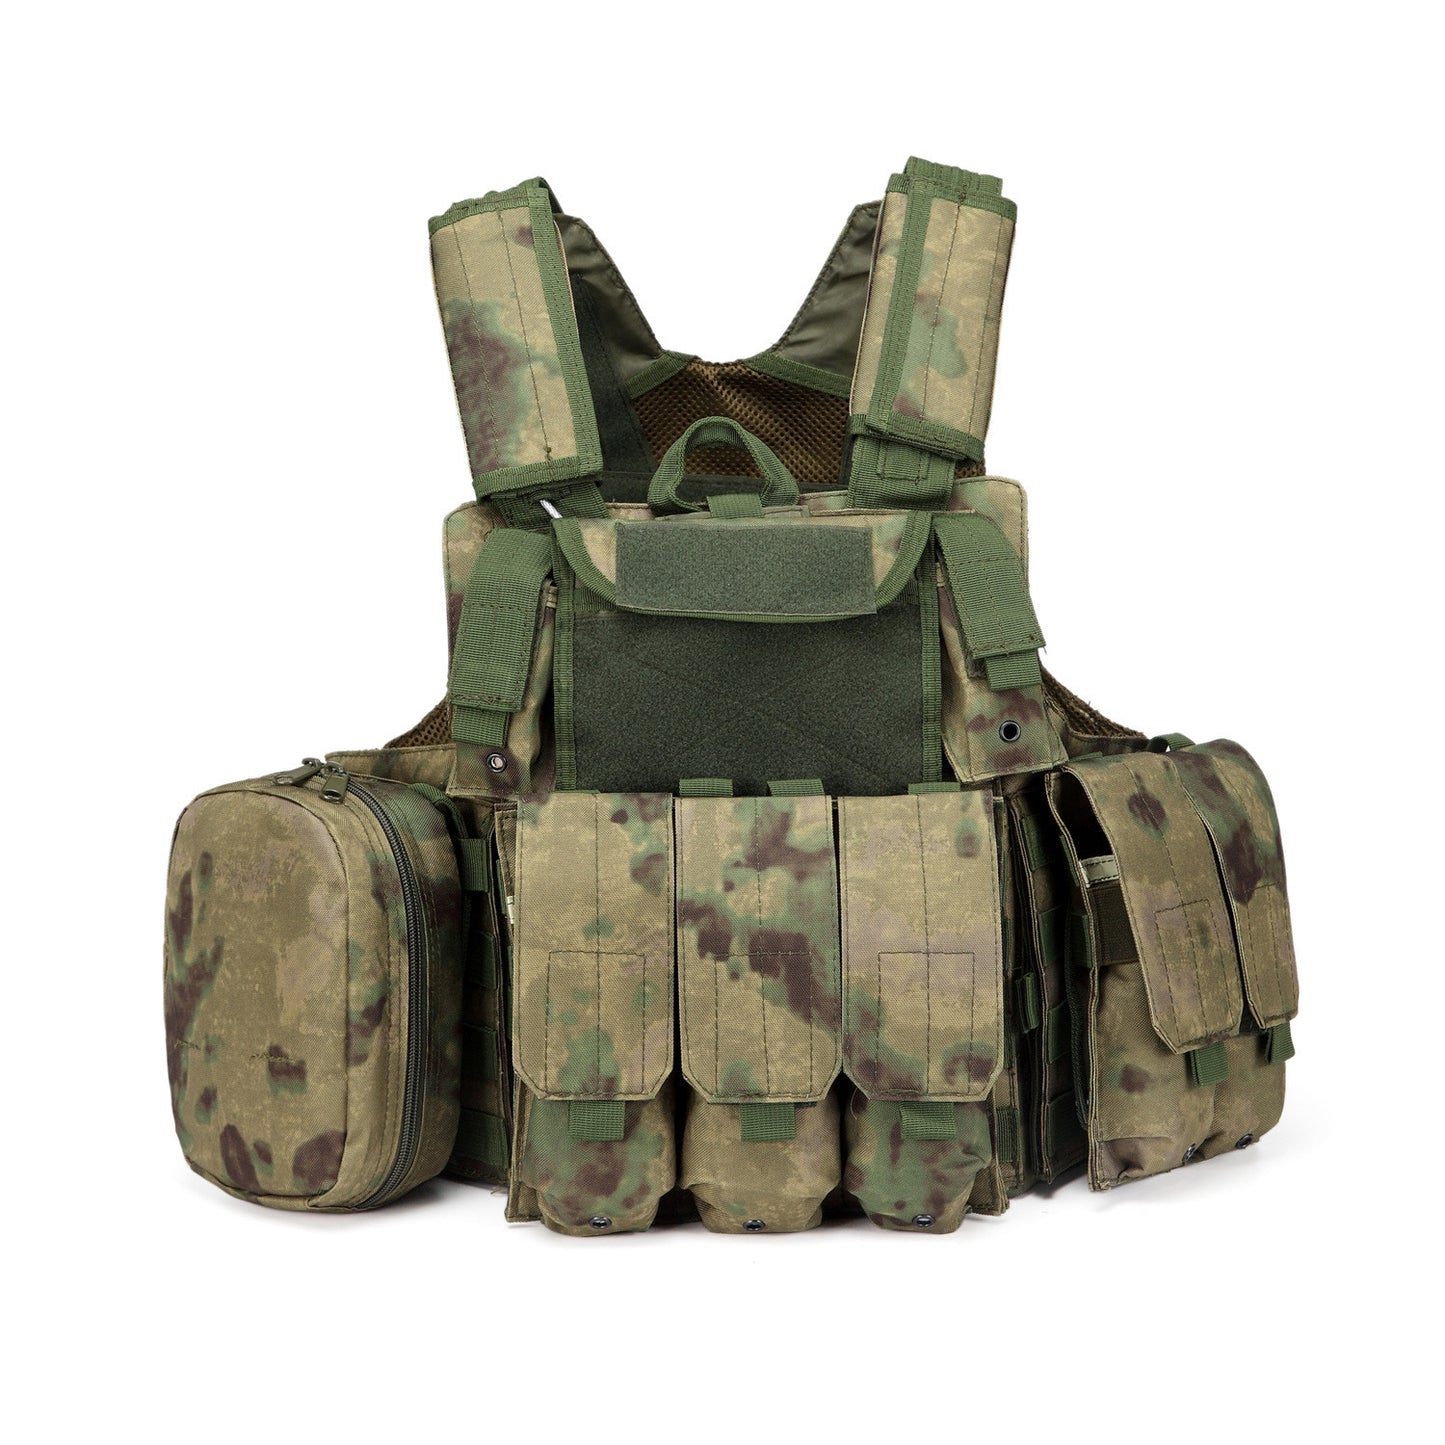 Tactical Vest Military Molle Plate Carrier Magazine Paintball CS Outdoor Velcro Protective Vest Hunting Vest (NF-YB-V015)